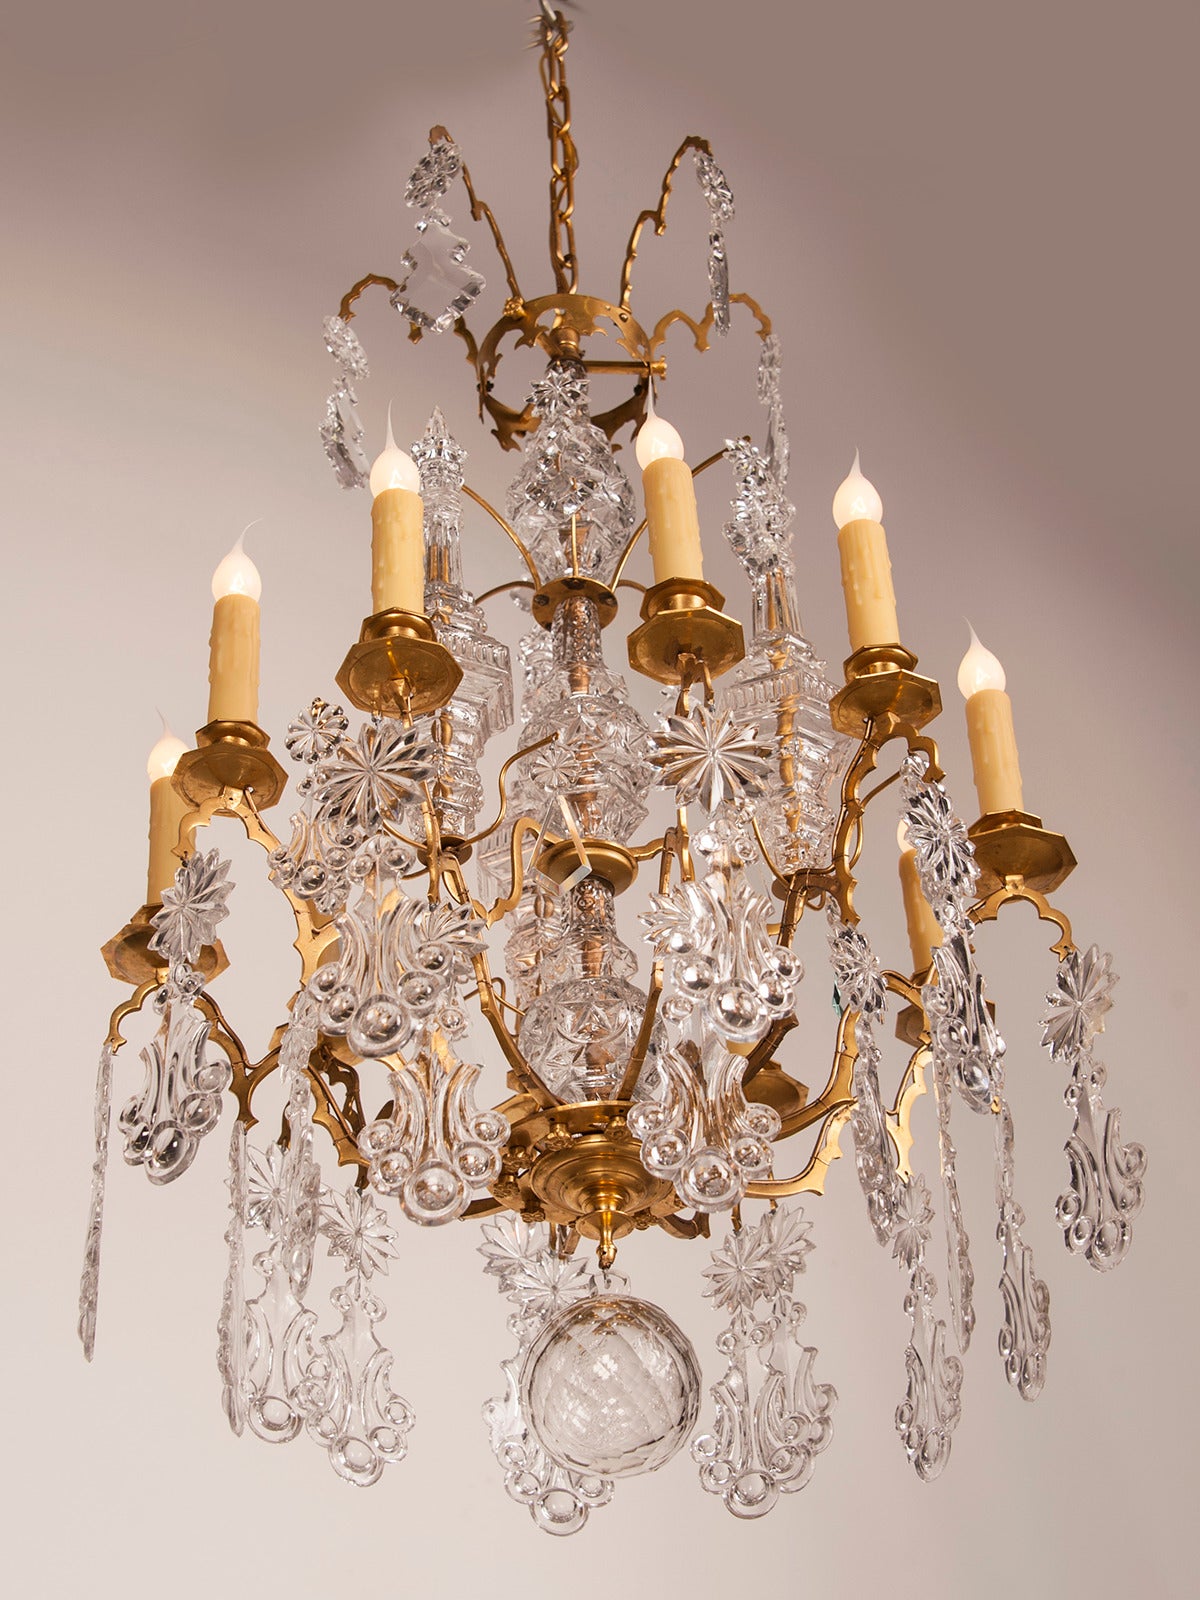 19th Century Antique French Louis XV Crystal Chandelier Gilded Brass Ten Lights circa 1875 For Sale